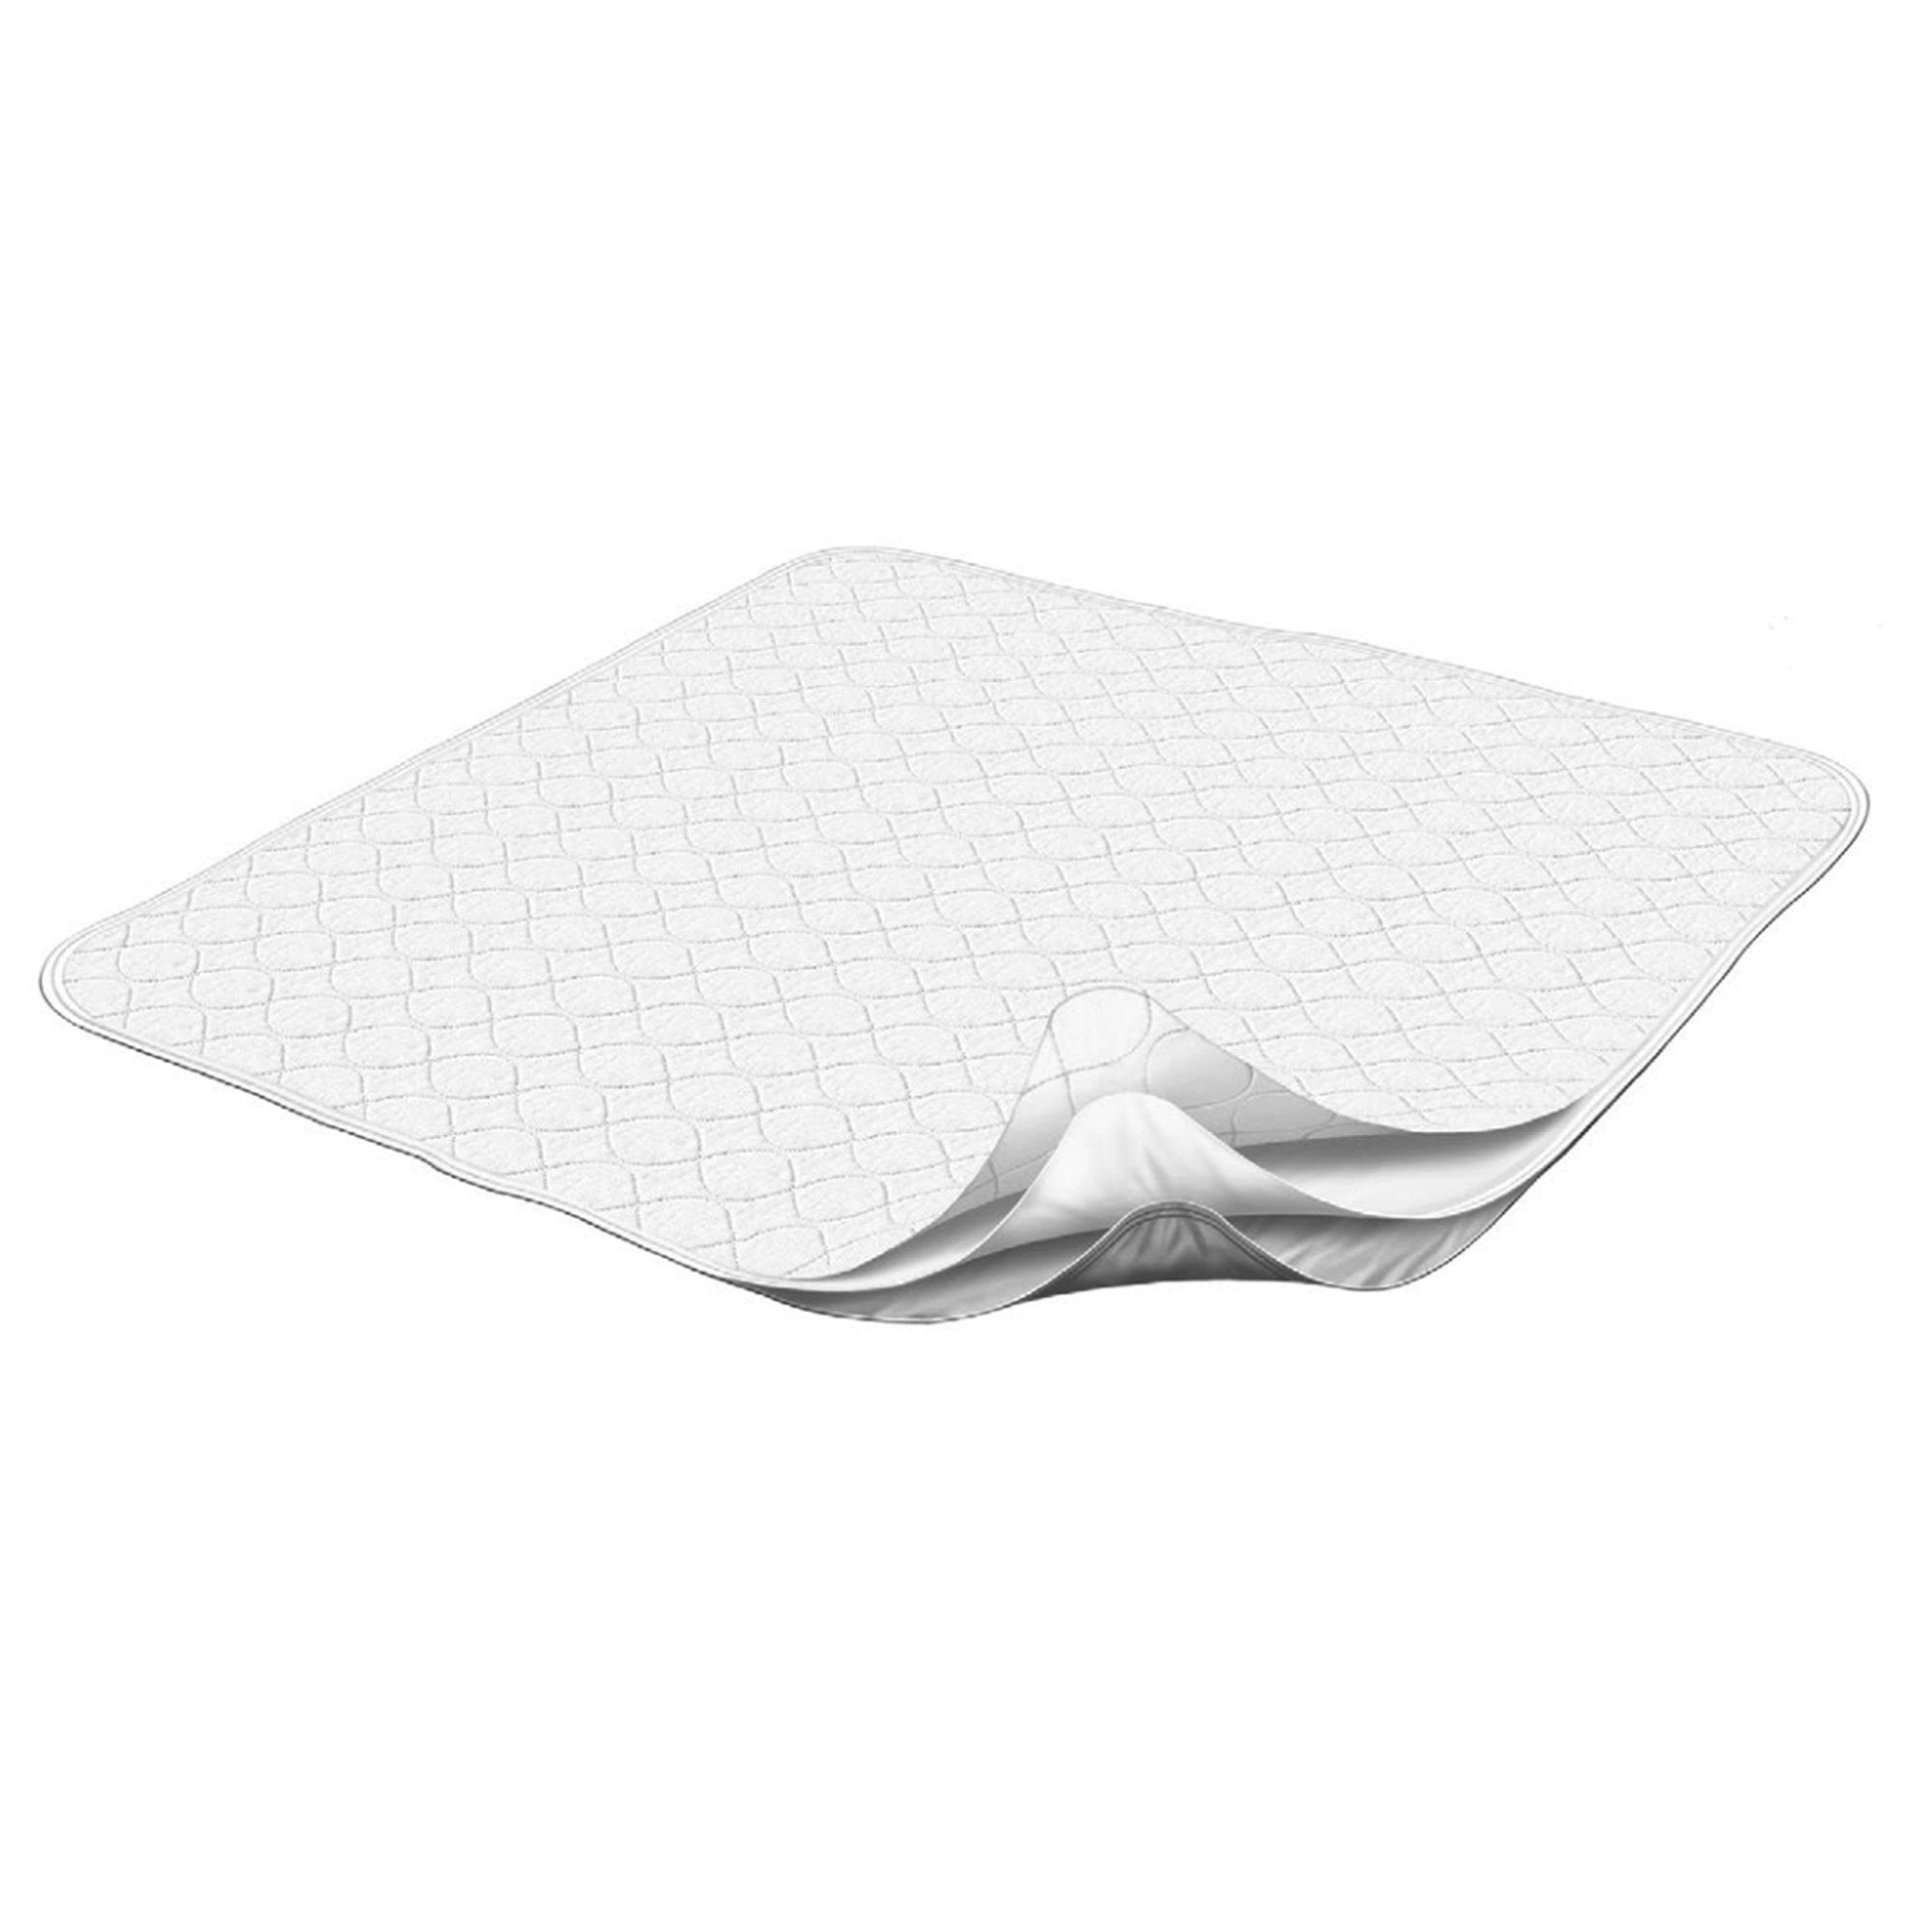 Reusable Underpad Dignity® Washable Sheet Protector 23 X 35 Inch Cotton Moderate Absorbency